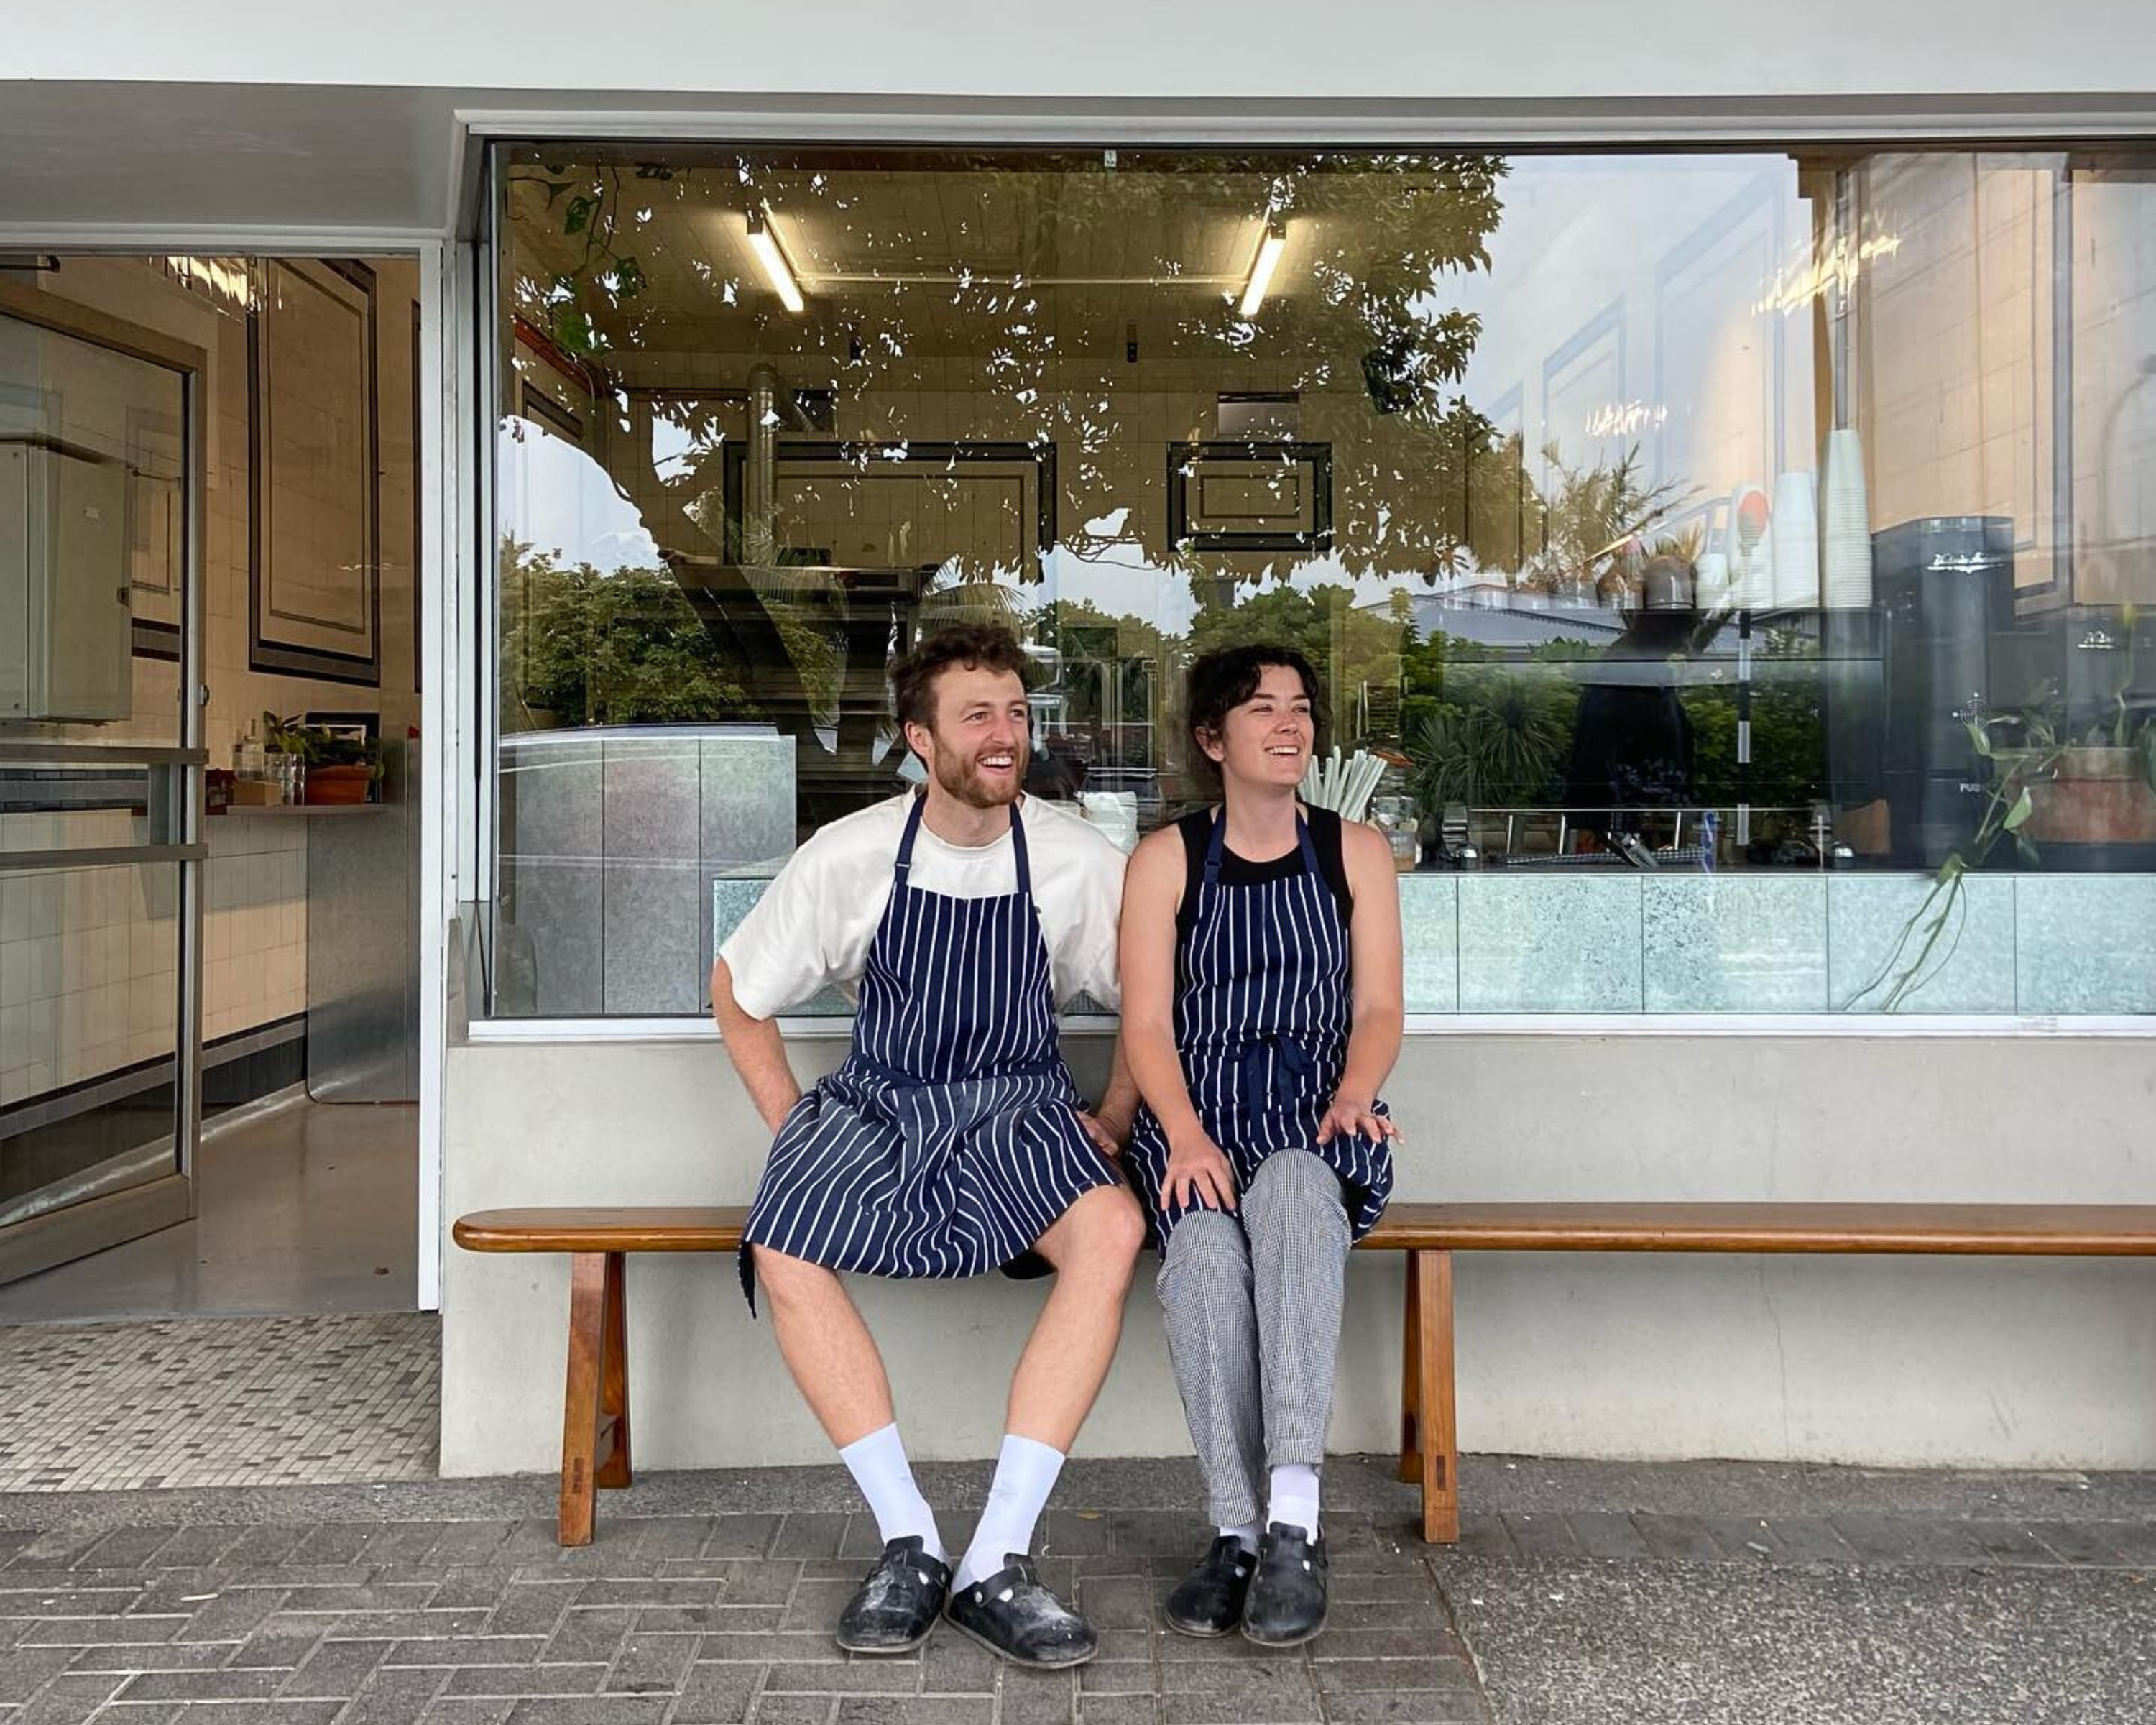 New bakery Beabea's has opened in Westmere, Auckland